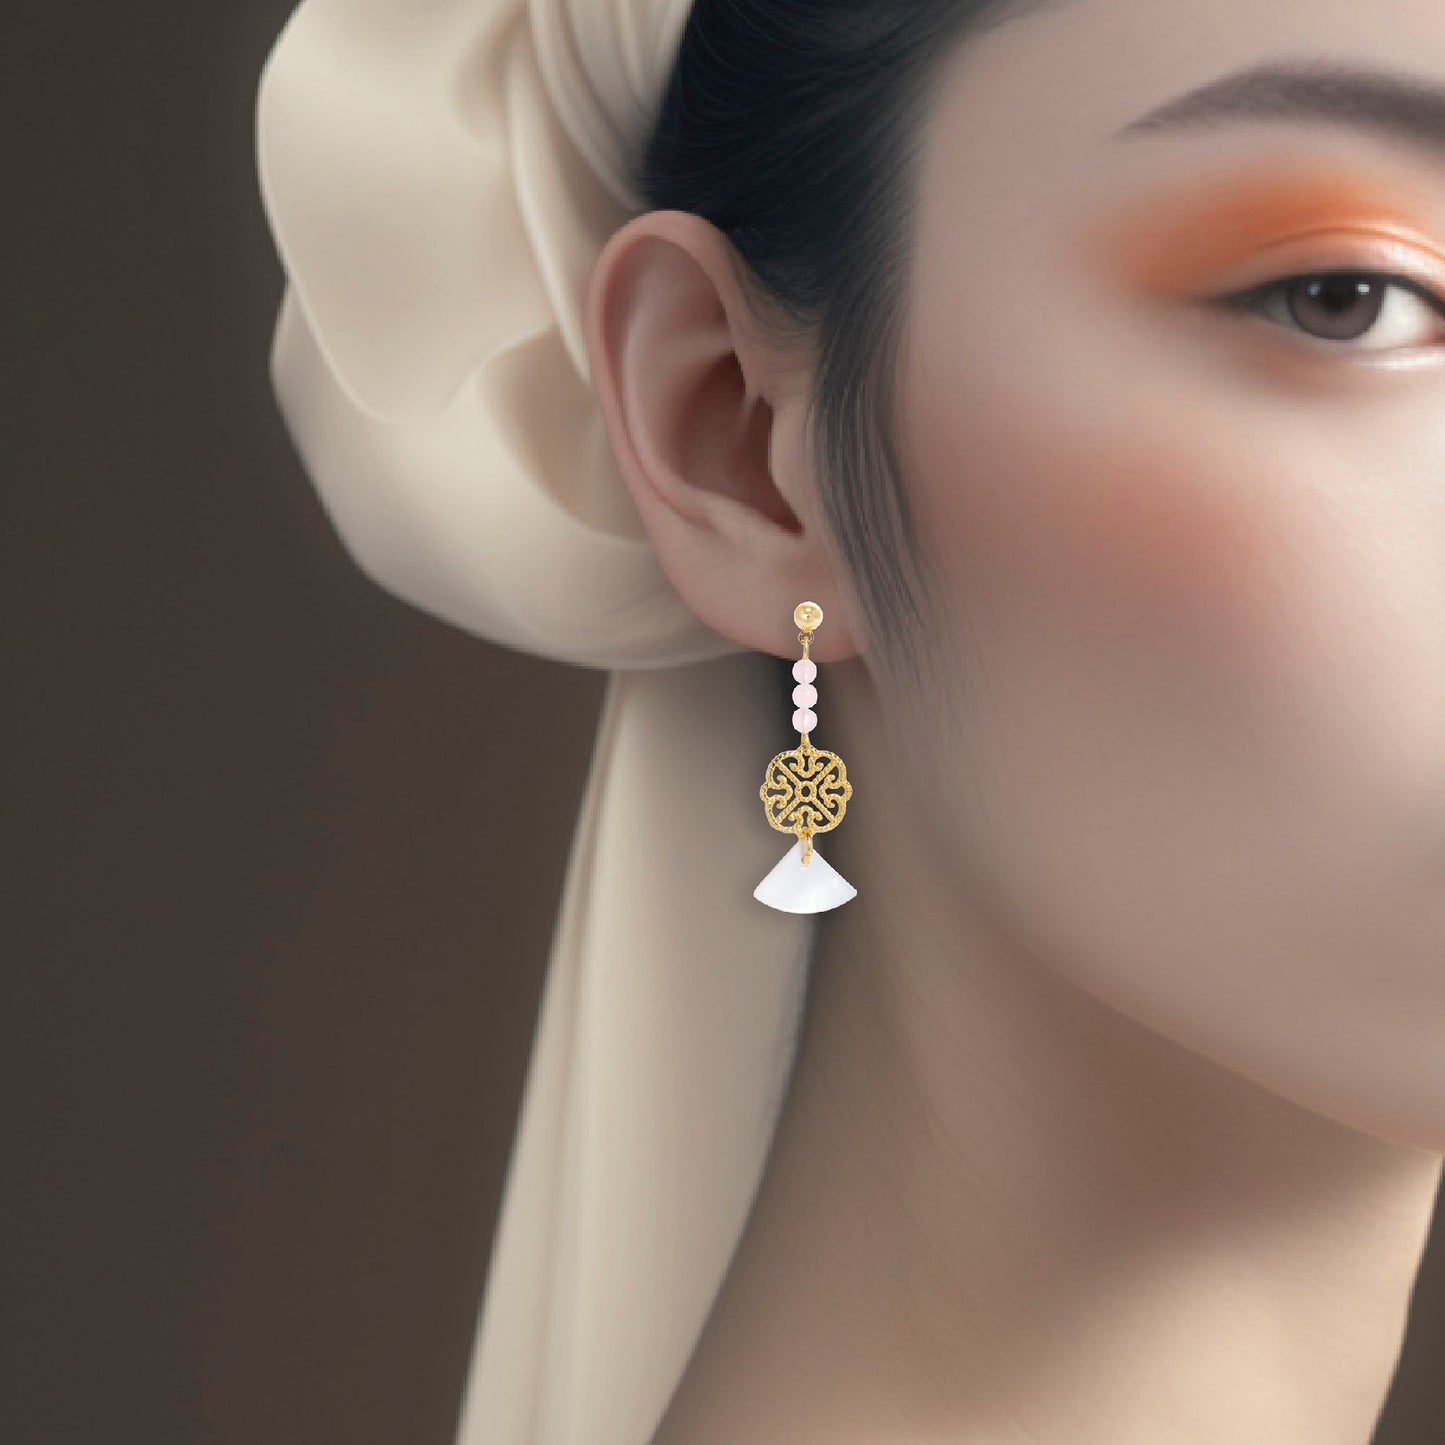 Oriental Motif Earrings With Rose Quartz - 14K Real Gold Plated Jewelry